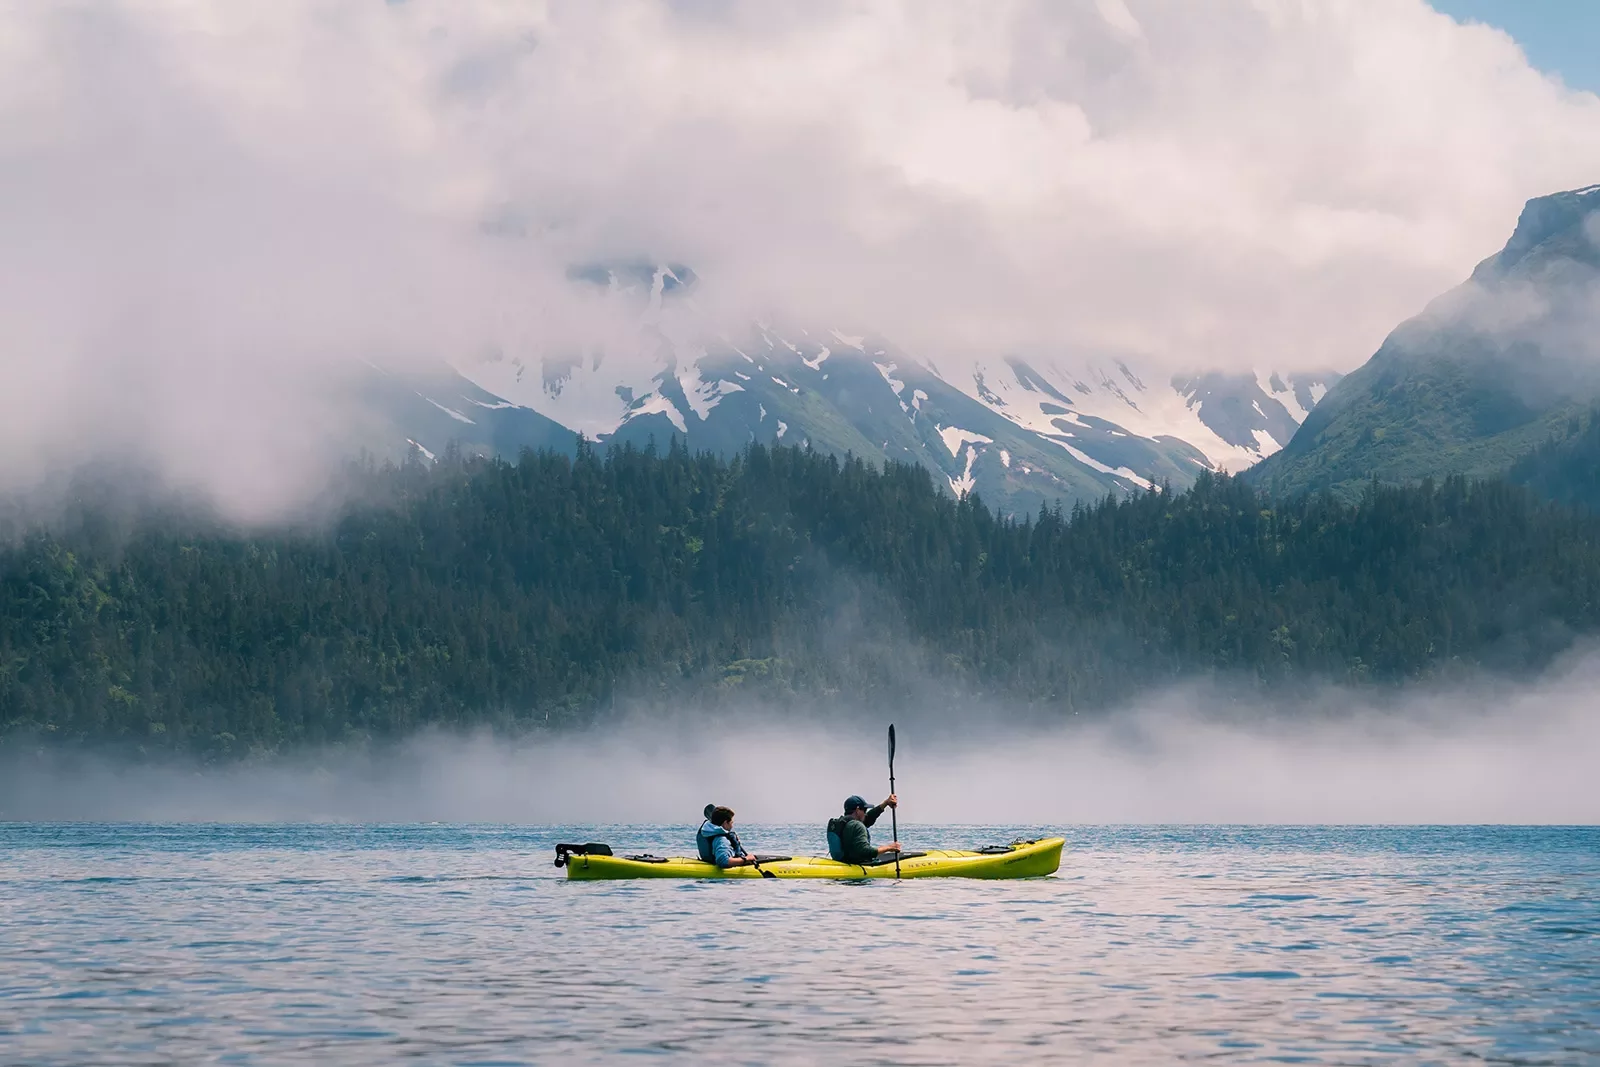 Kayak with two people